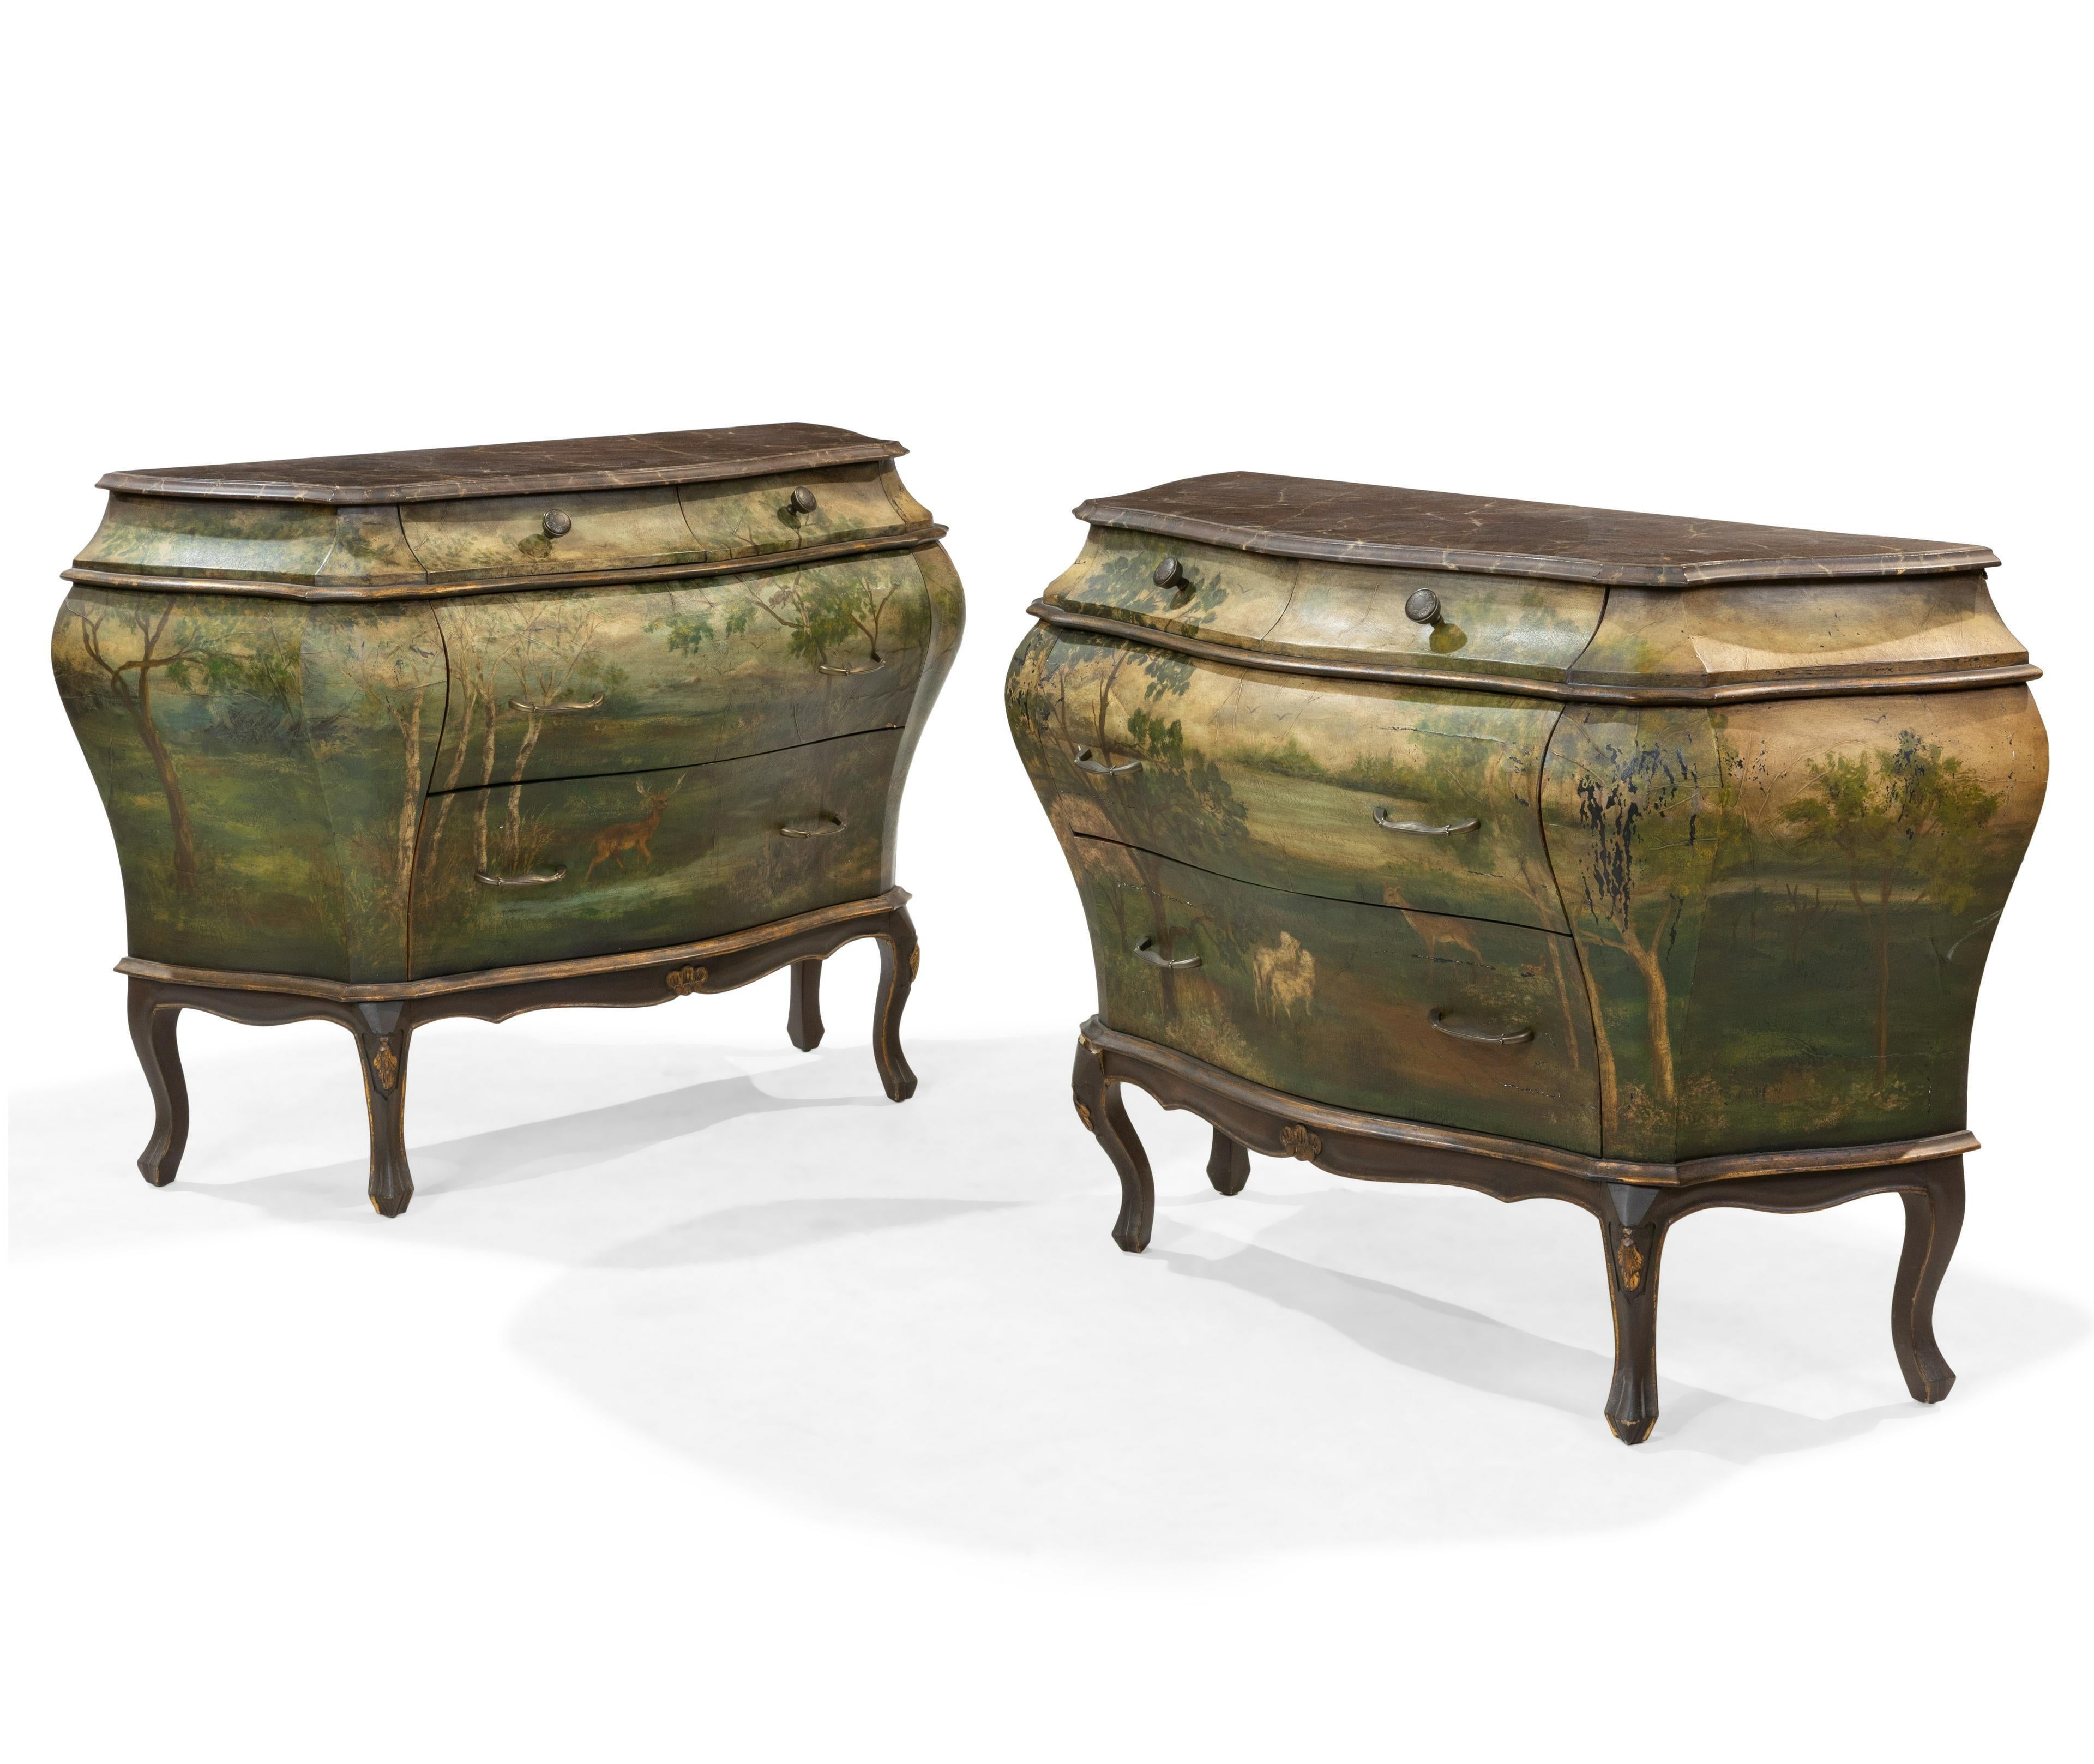 Pair of Italian painted faux marble-top Bombay commodes or nightstands. A finely hand painted pair of commodes or night tables each having a faux painted marble top with Bombay form cases each having Wonderfully painted forest scene with deer, sheep